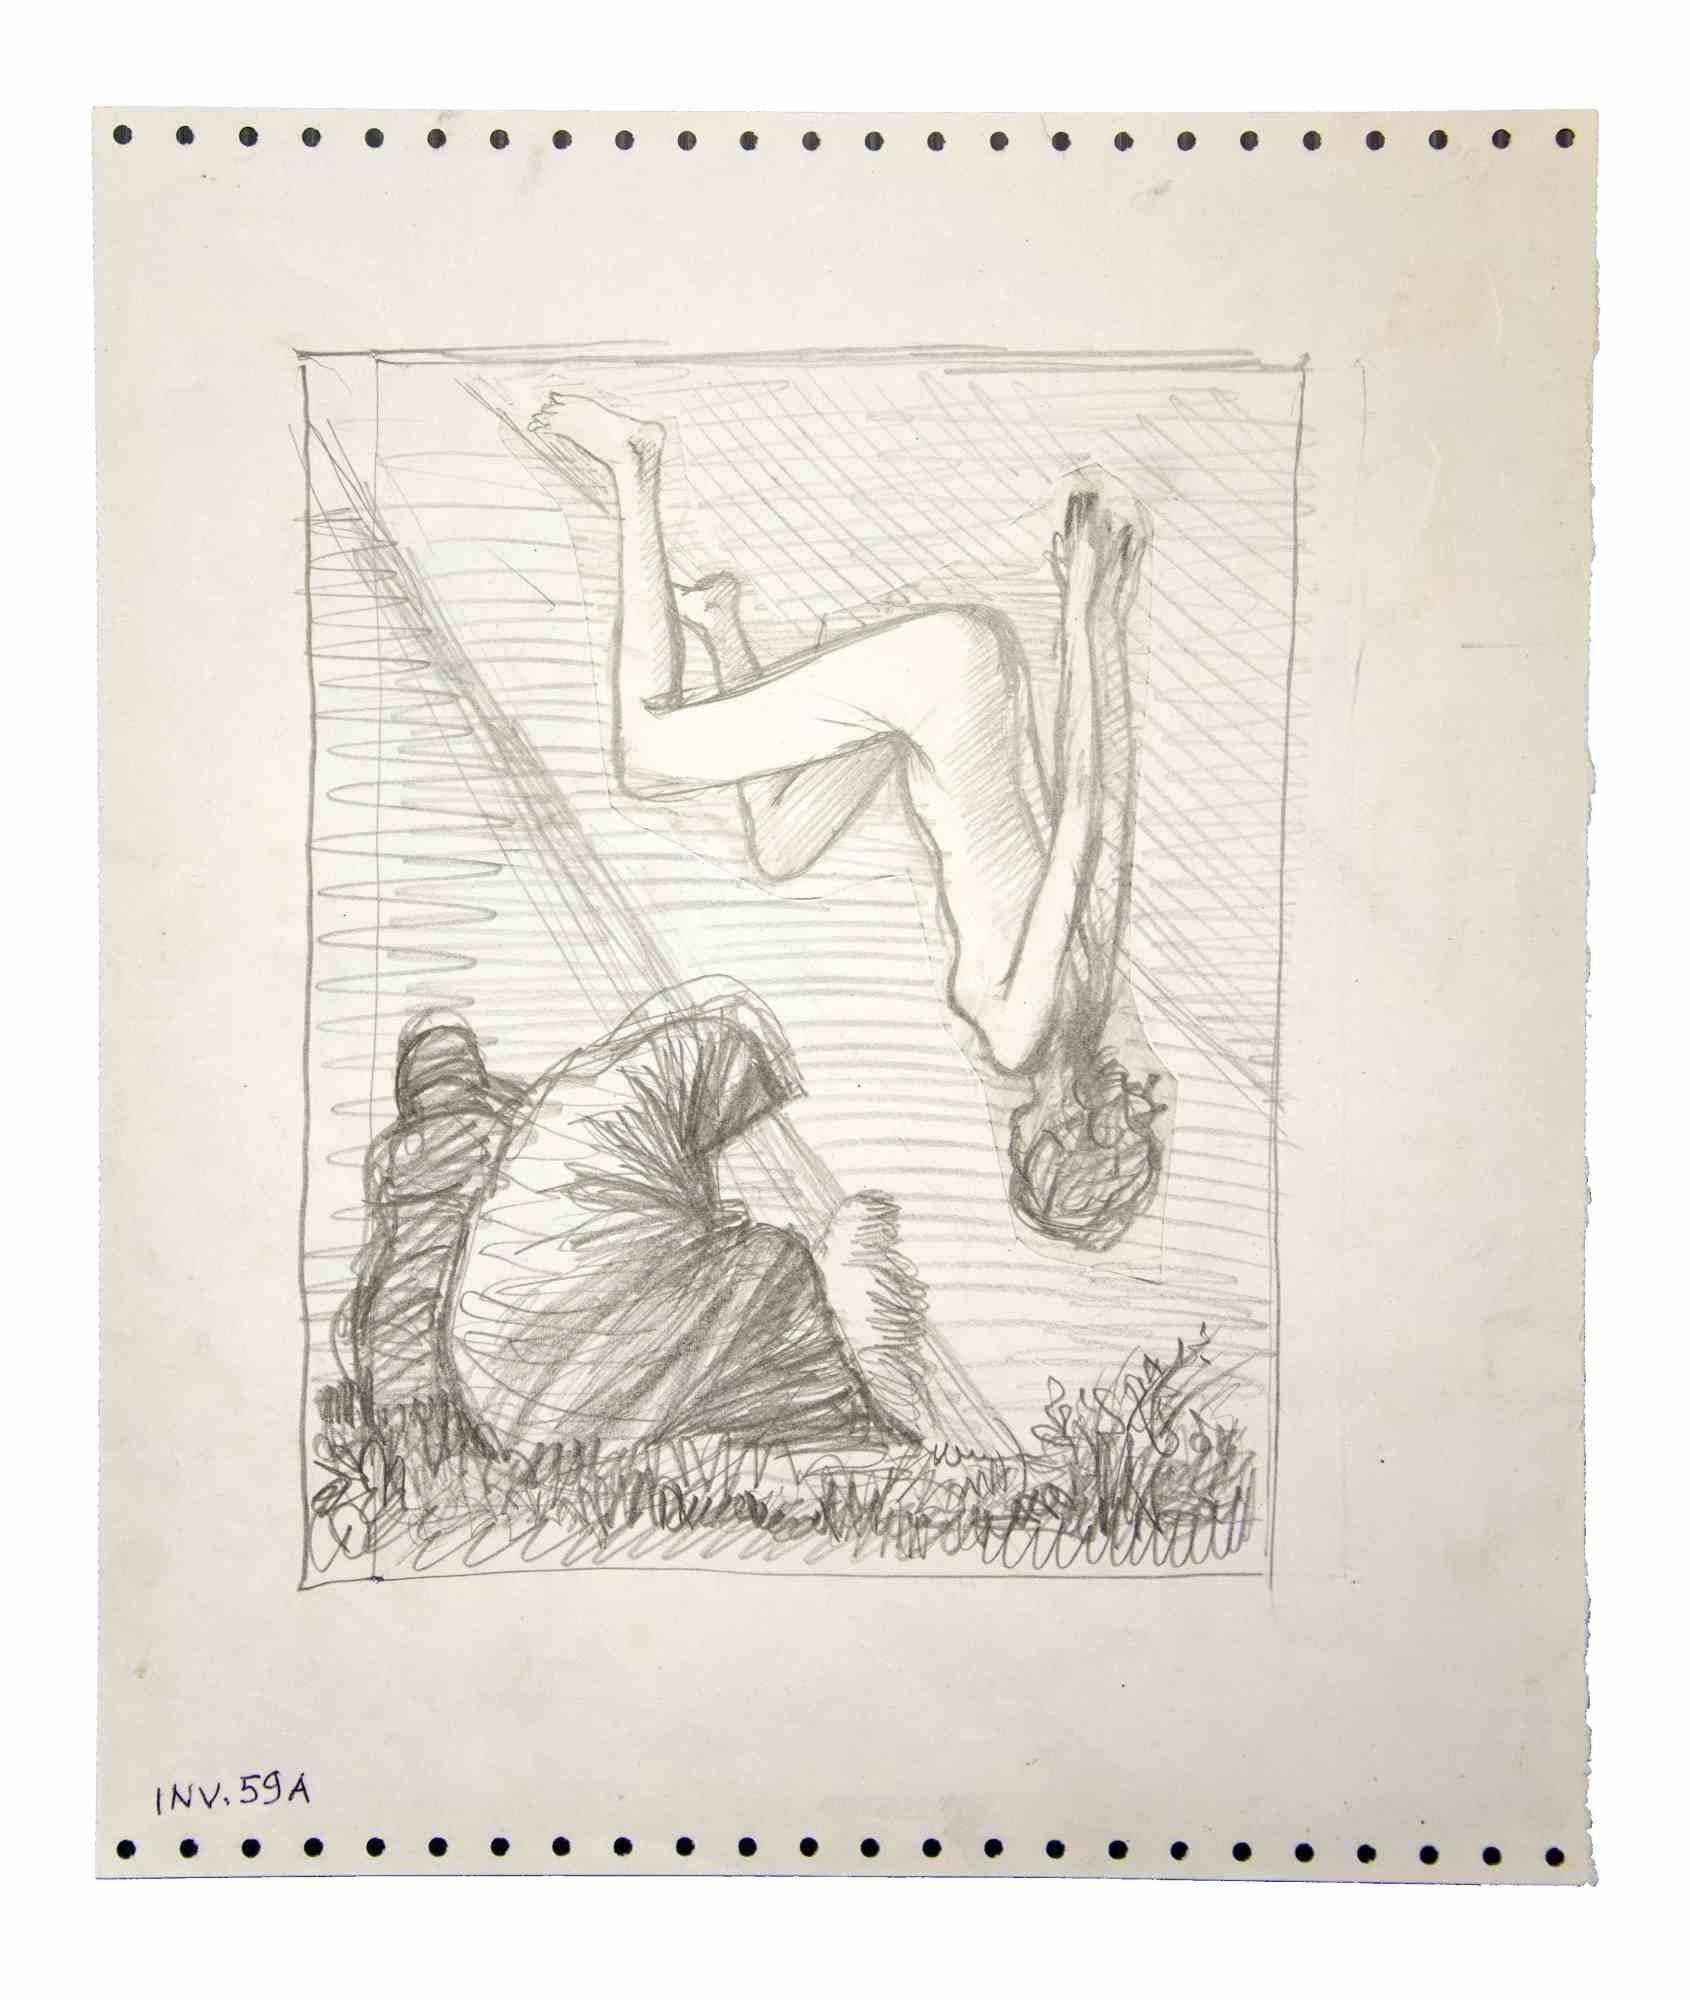 Suspended Nude is an original Contemporary artwork realized in 1970 ca. by the Italian Contemporary artist  Leo Guida  (1992 - 2017).

Original drawing in pencil on ivory-colored paper

Good conditions.

Leo Guida  (1992 - 2017). Sensitive to